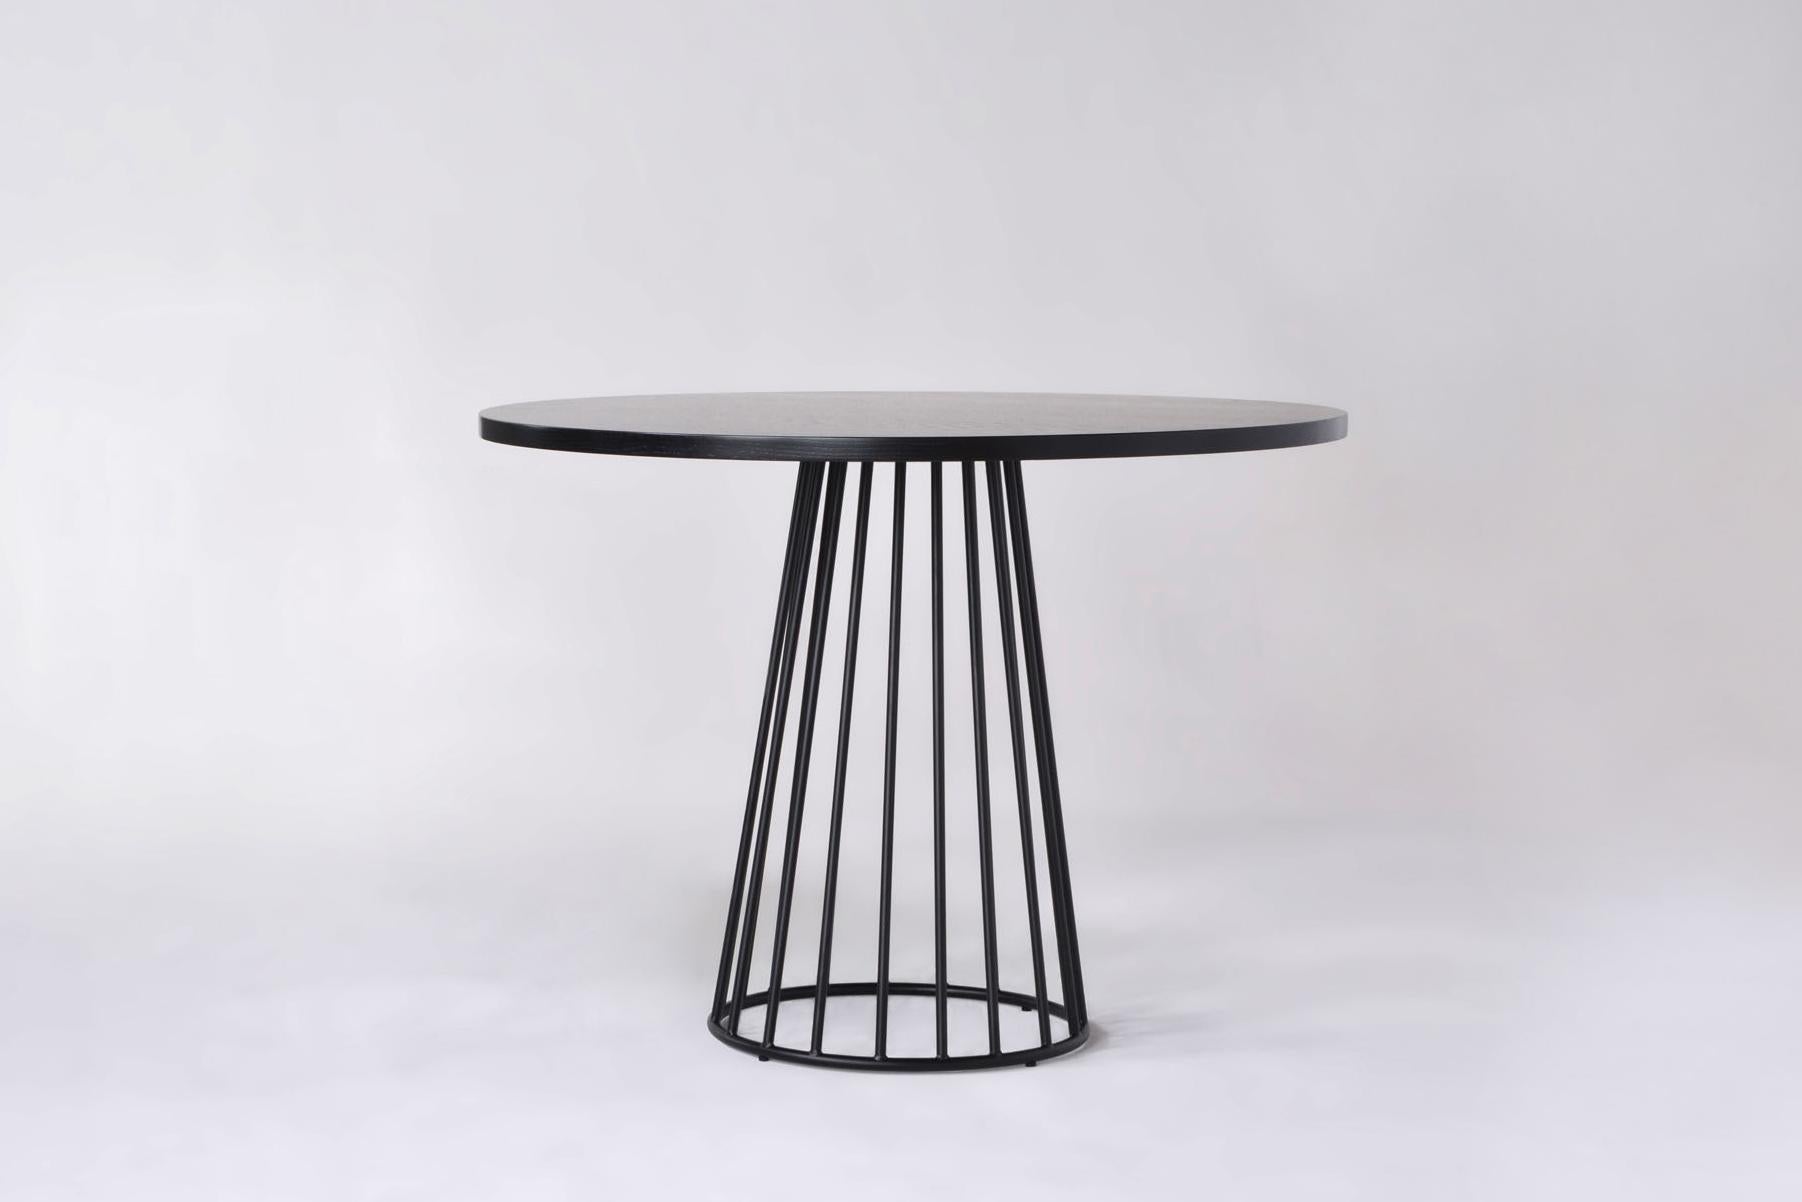 Listed price is for the wired cafe table with a polished chrome base and either walnut, white oak, or ebonized oak wood top. 

Prices exclude packing.

Tapered lengths of metal meet with intention in a modern interpretation of the wiry idea